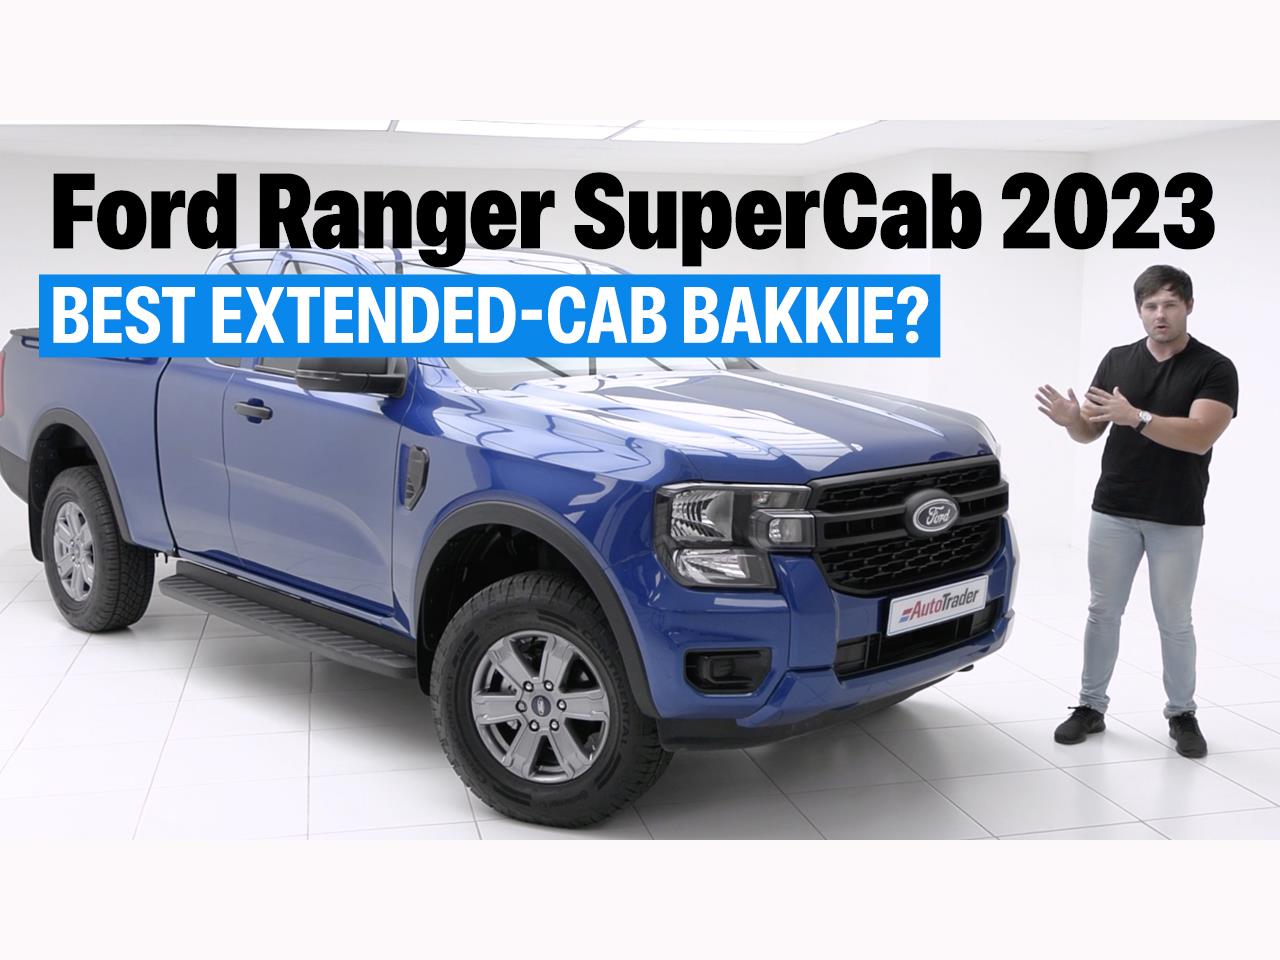 Ford Ranger 2.0 SiT SuperCab XL 4x4 auto (2023) Video Review